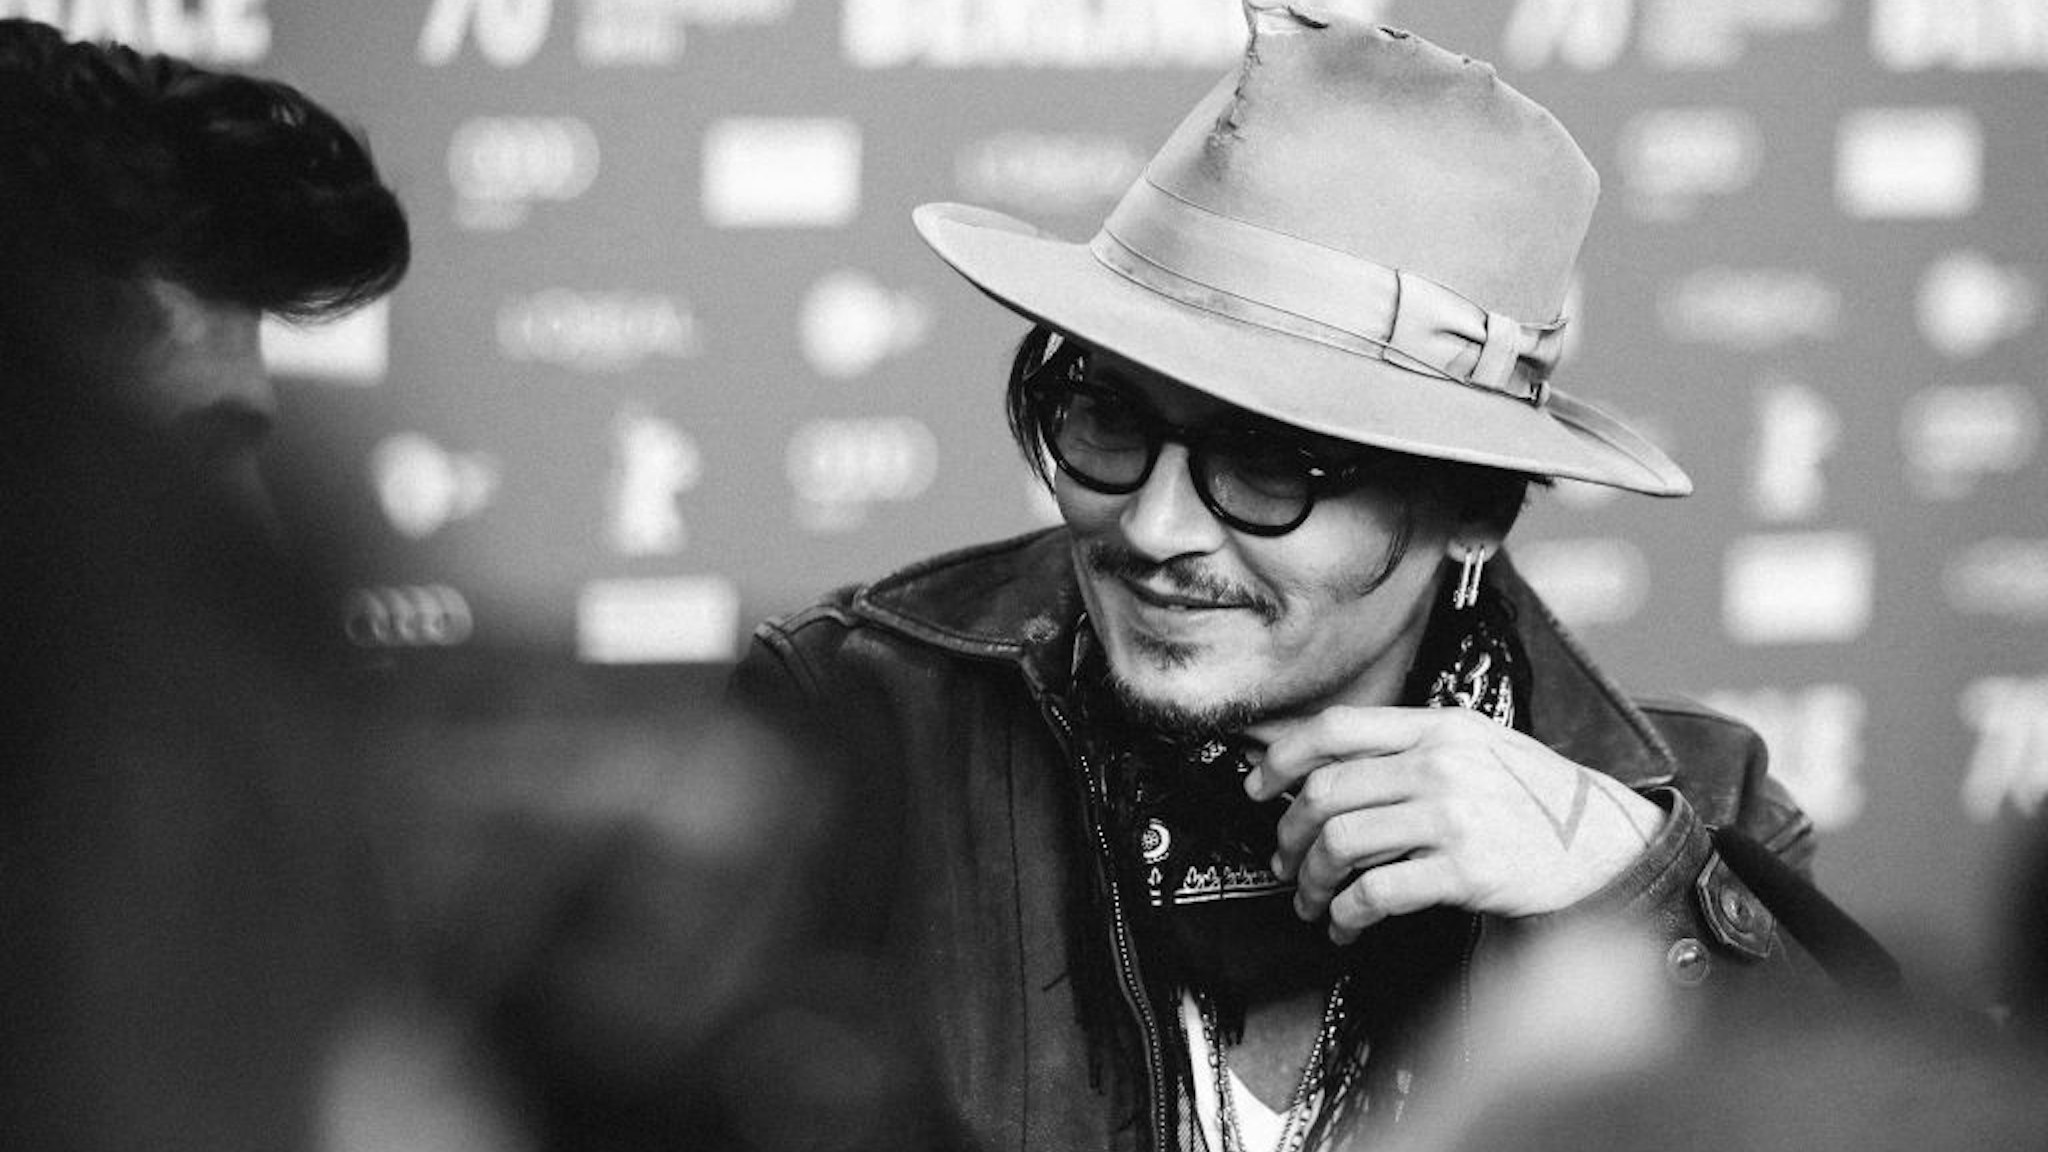 Johnny Depp speaks at the "Minamata" press conference during the 70th Berlinale International Film Festival Berlin at Grand Hyatt Hotel on February 21, 2020 in Berlin, Germany.